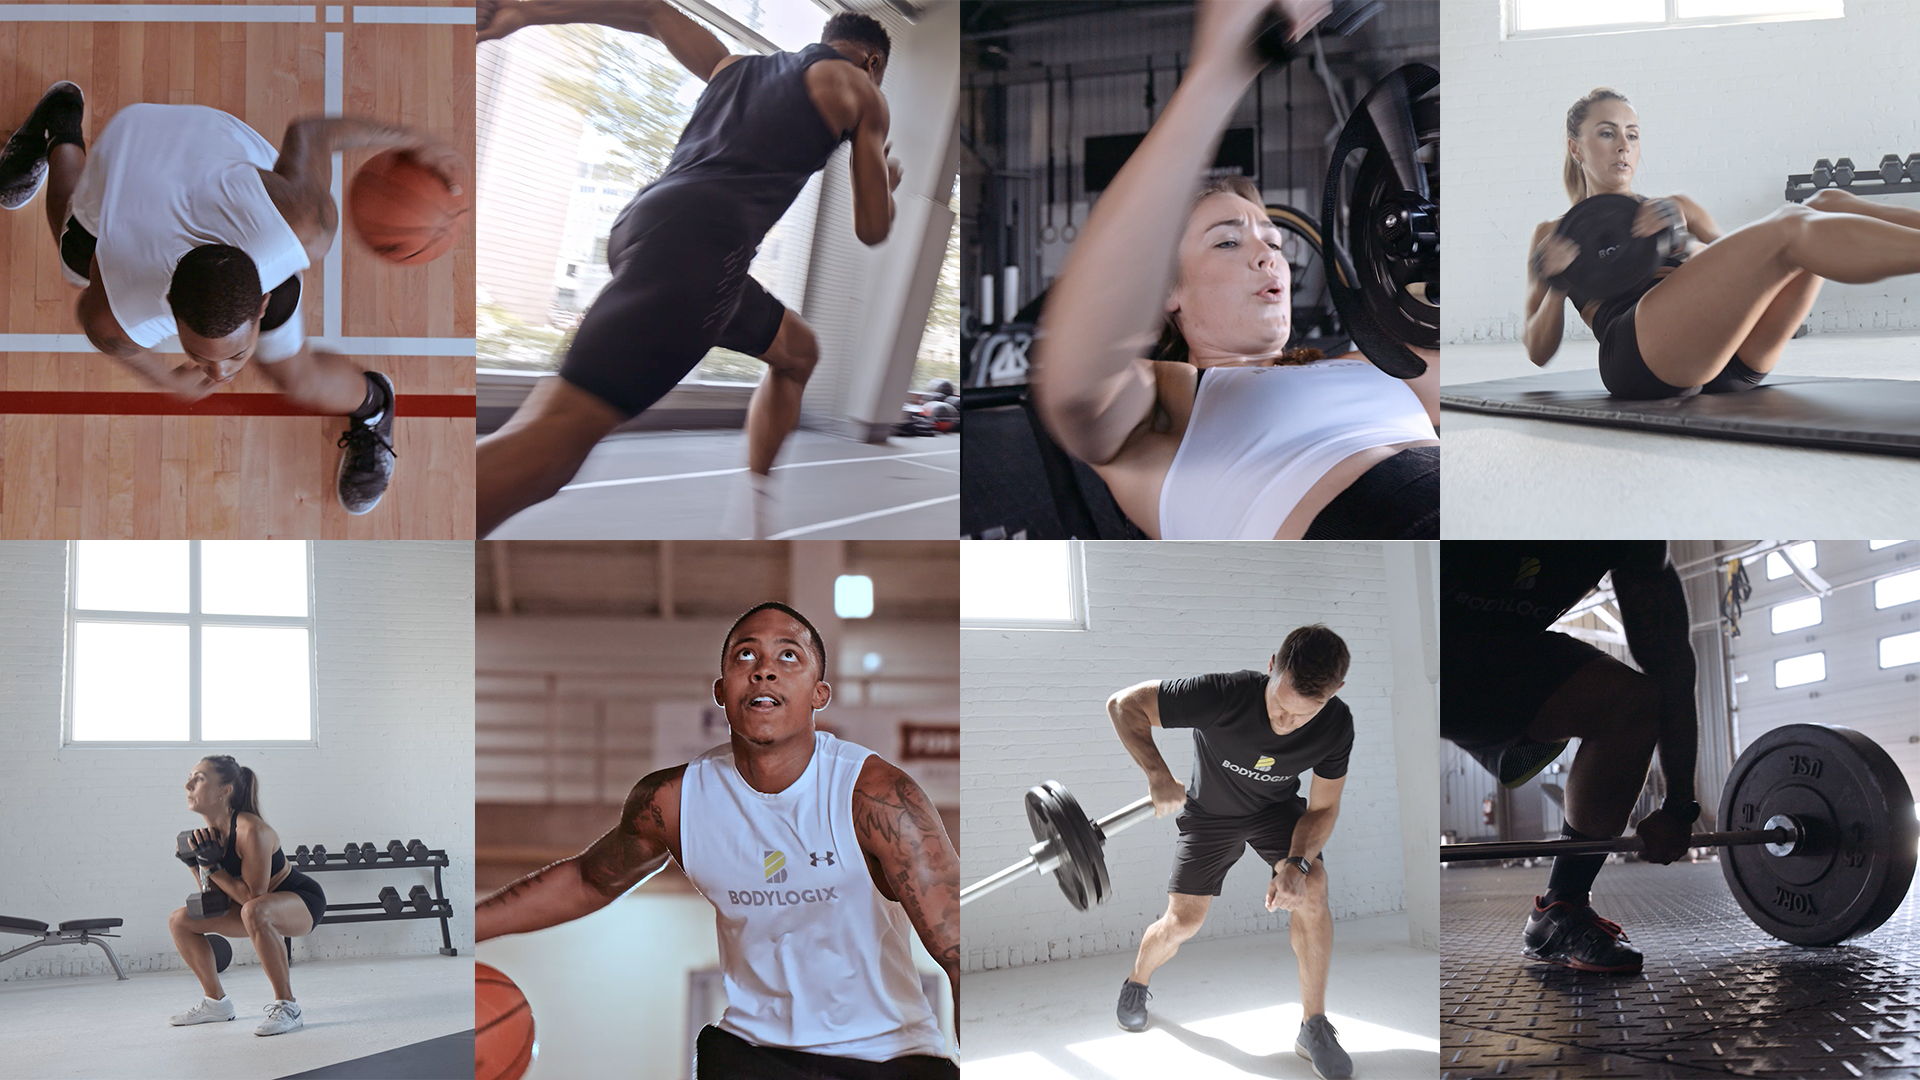 A collage of images featuring a man bouncing a basketball, a man running, a woman exercising with weights, and men lifting barbells.